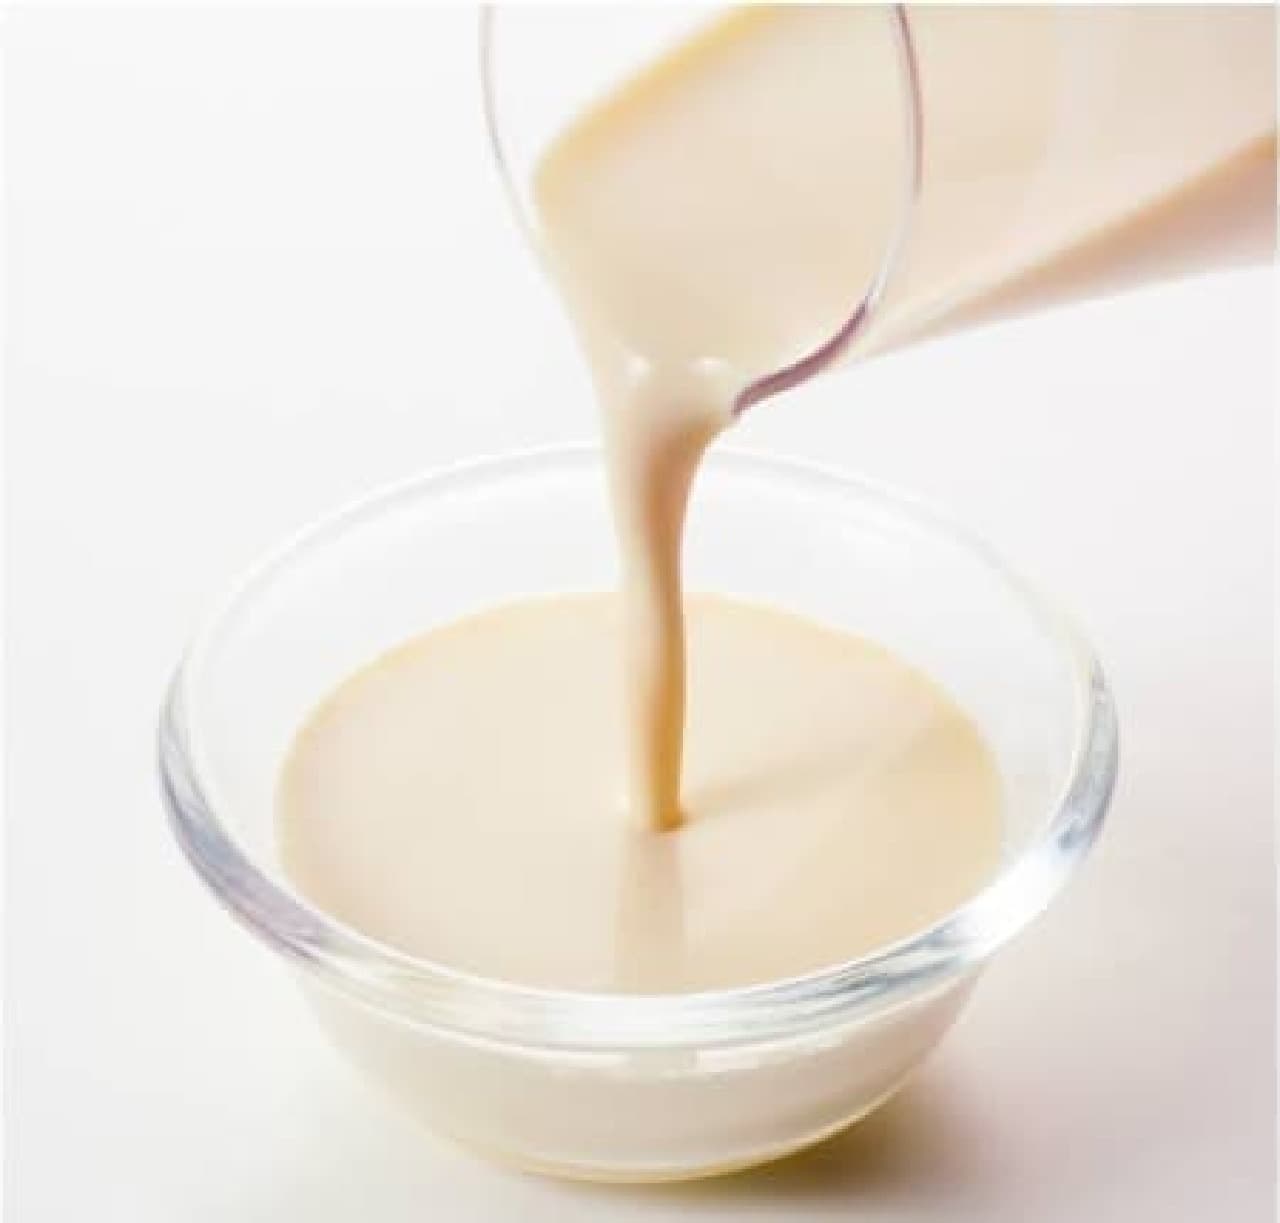 Soy milk cream with a rich richness